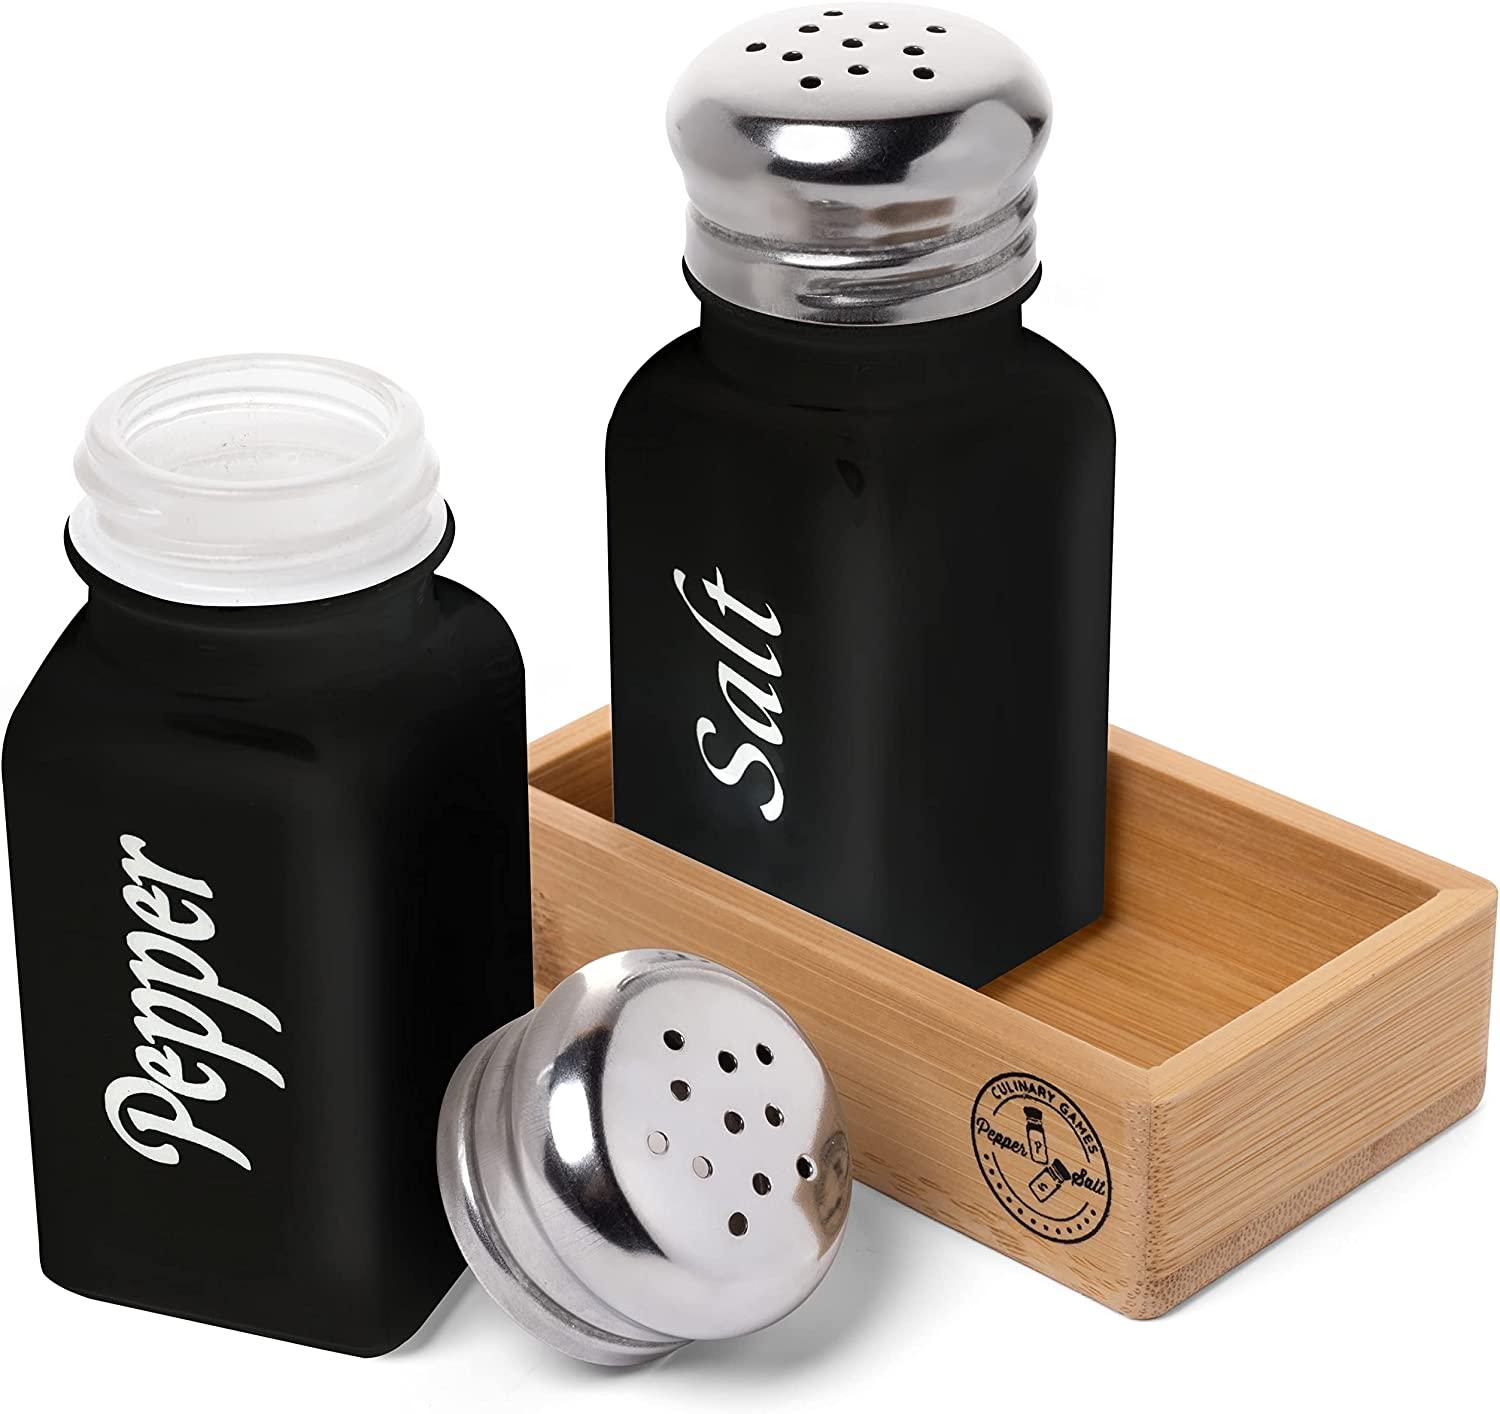  Center Gifts Personalized Glass Lightbulb Salt and Pepper Shaker  Set - Spices Stylish Gift for Women - Best Salt and Pepper Shakers for  Kitchen Restaurants and Catering: Home & Kitchen